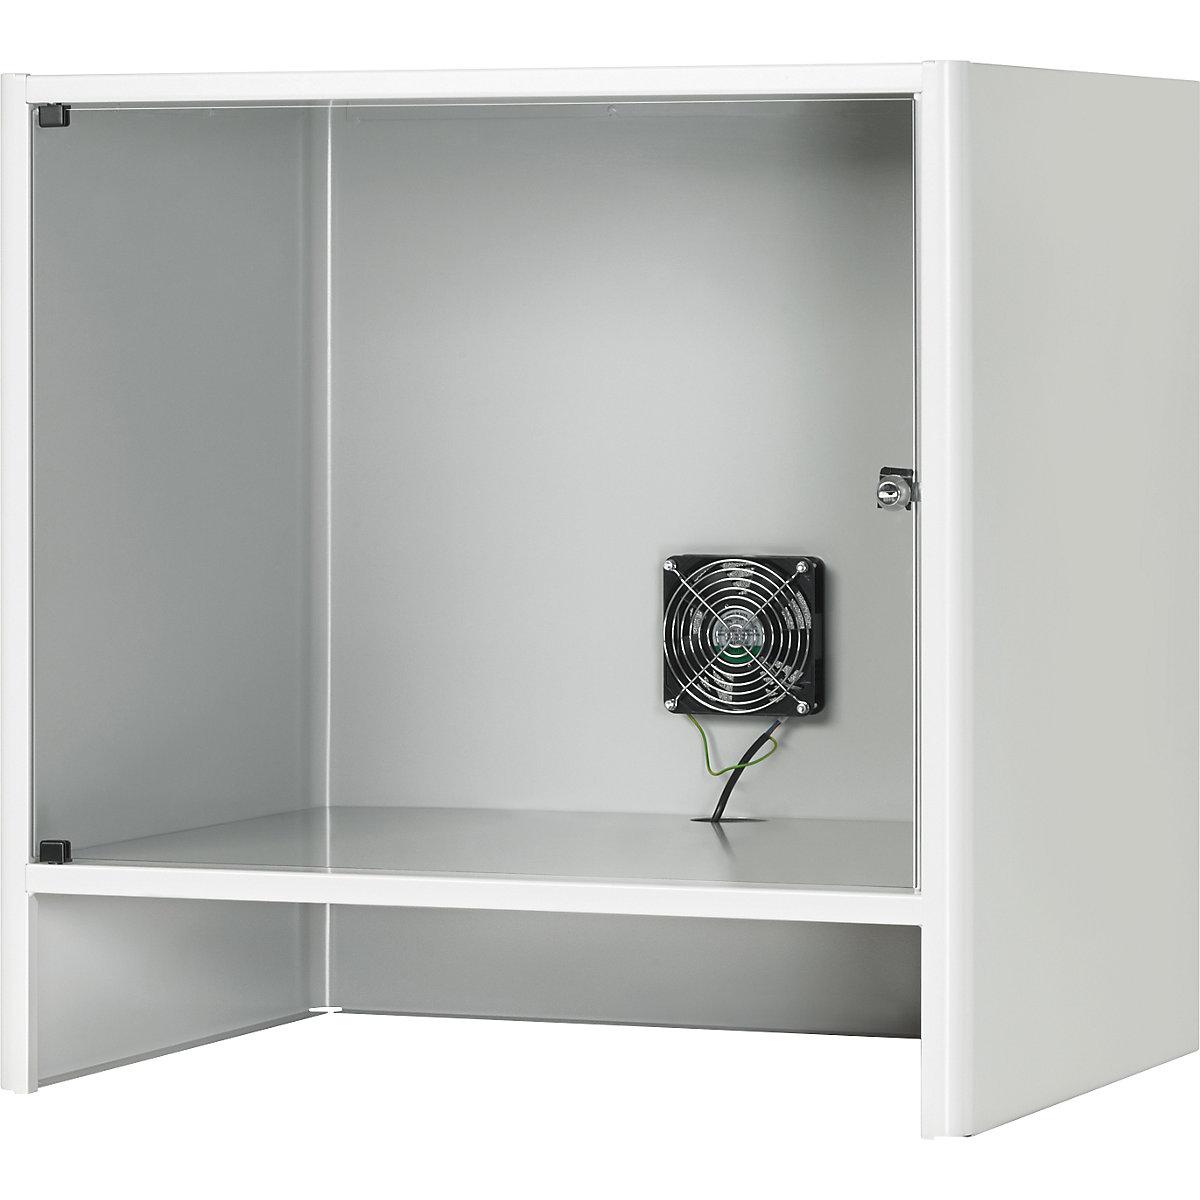 Monitor housing with integrated ventilation fan – RAU